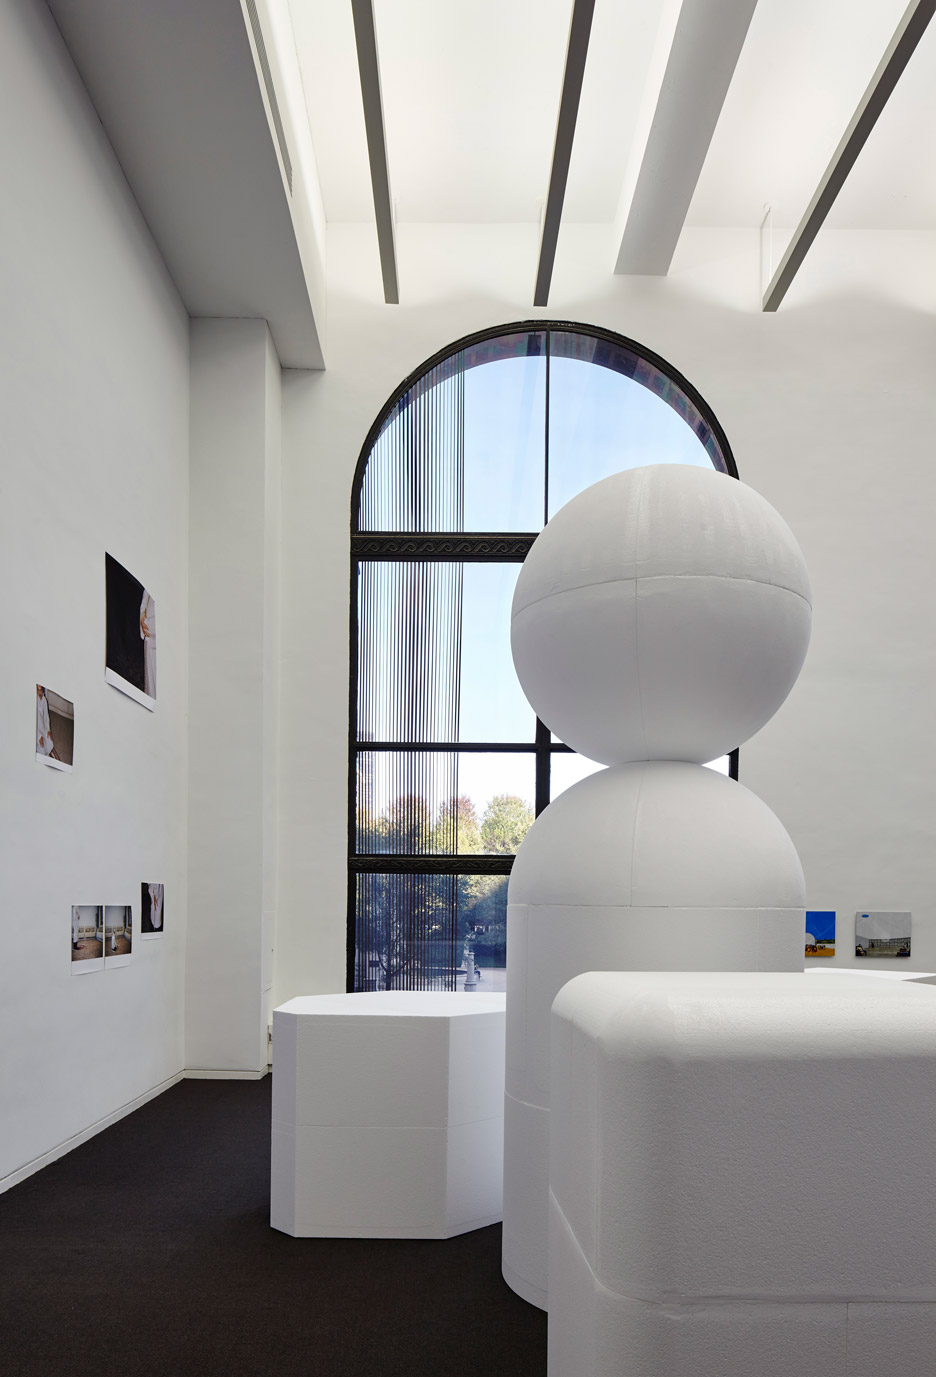 Kuehn Malvezzi’s House Of One Installation Represents A House Of Prayer For Three Religions